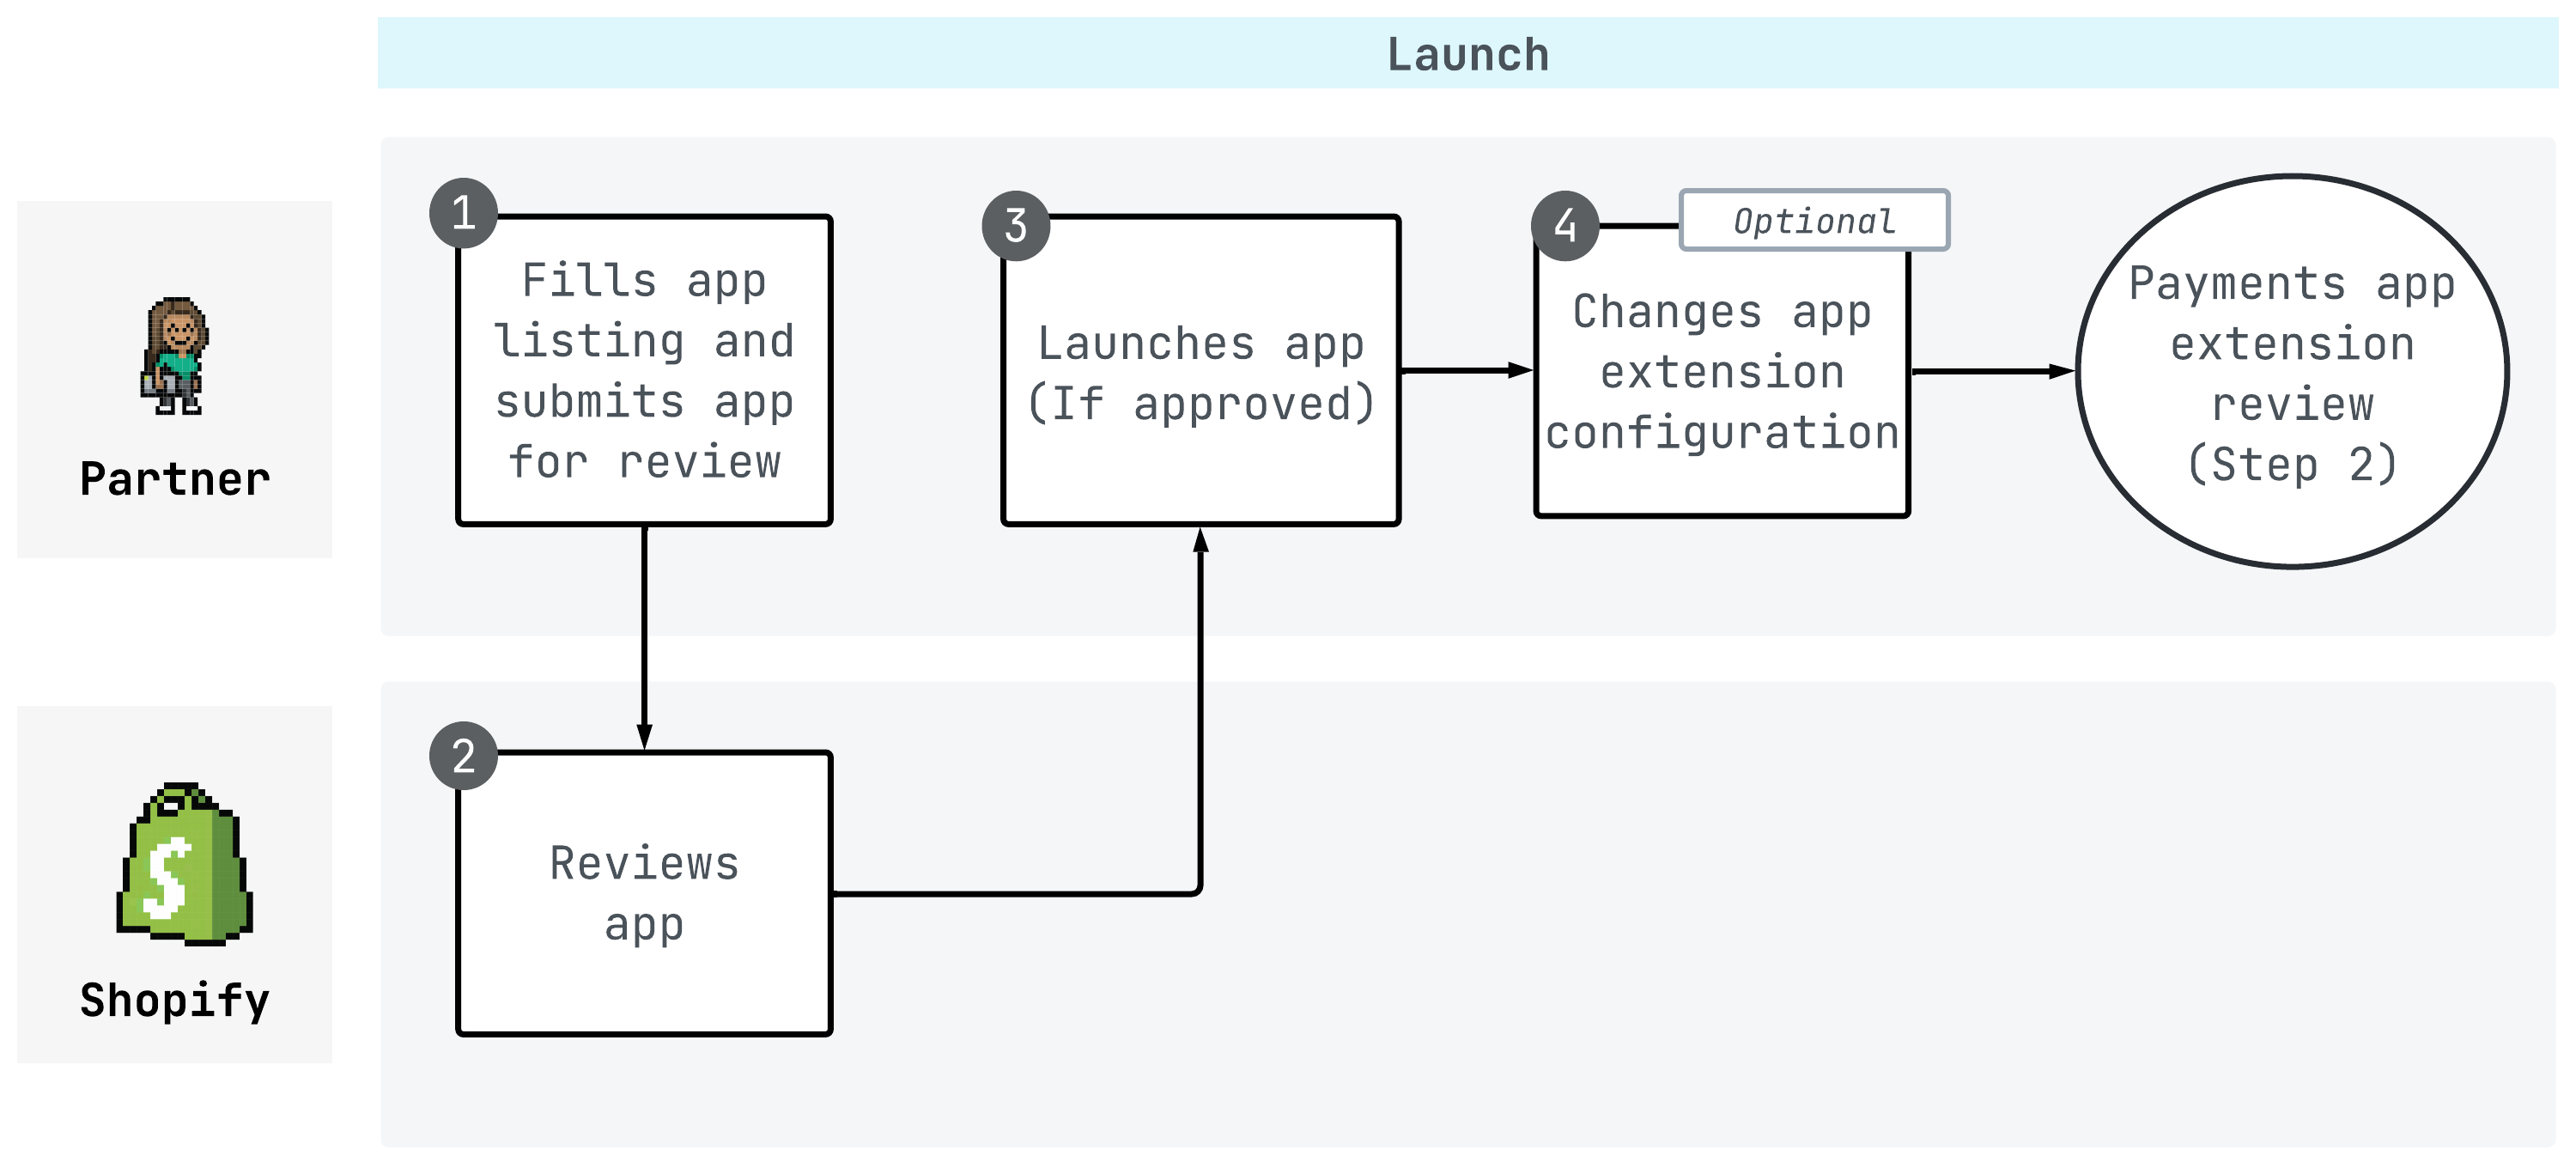 A flow chart of the payments app review process steps